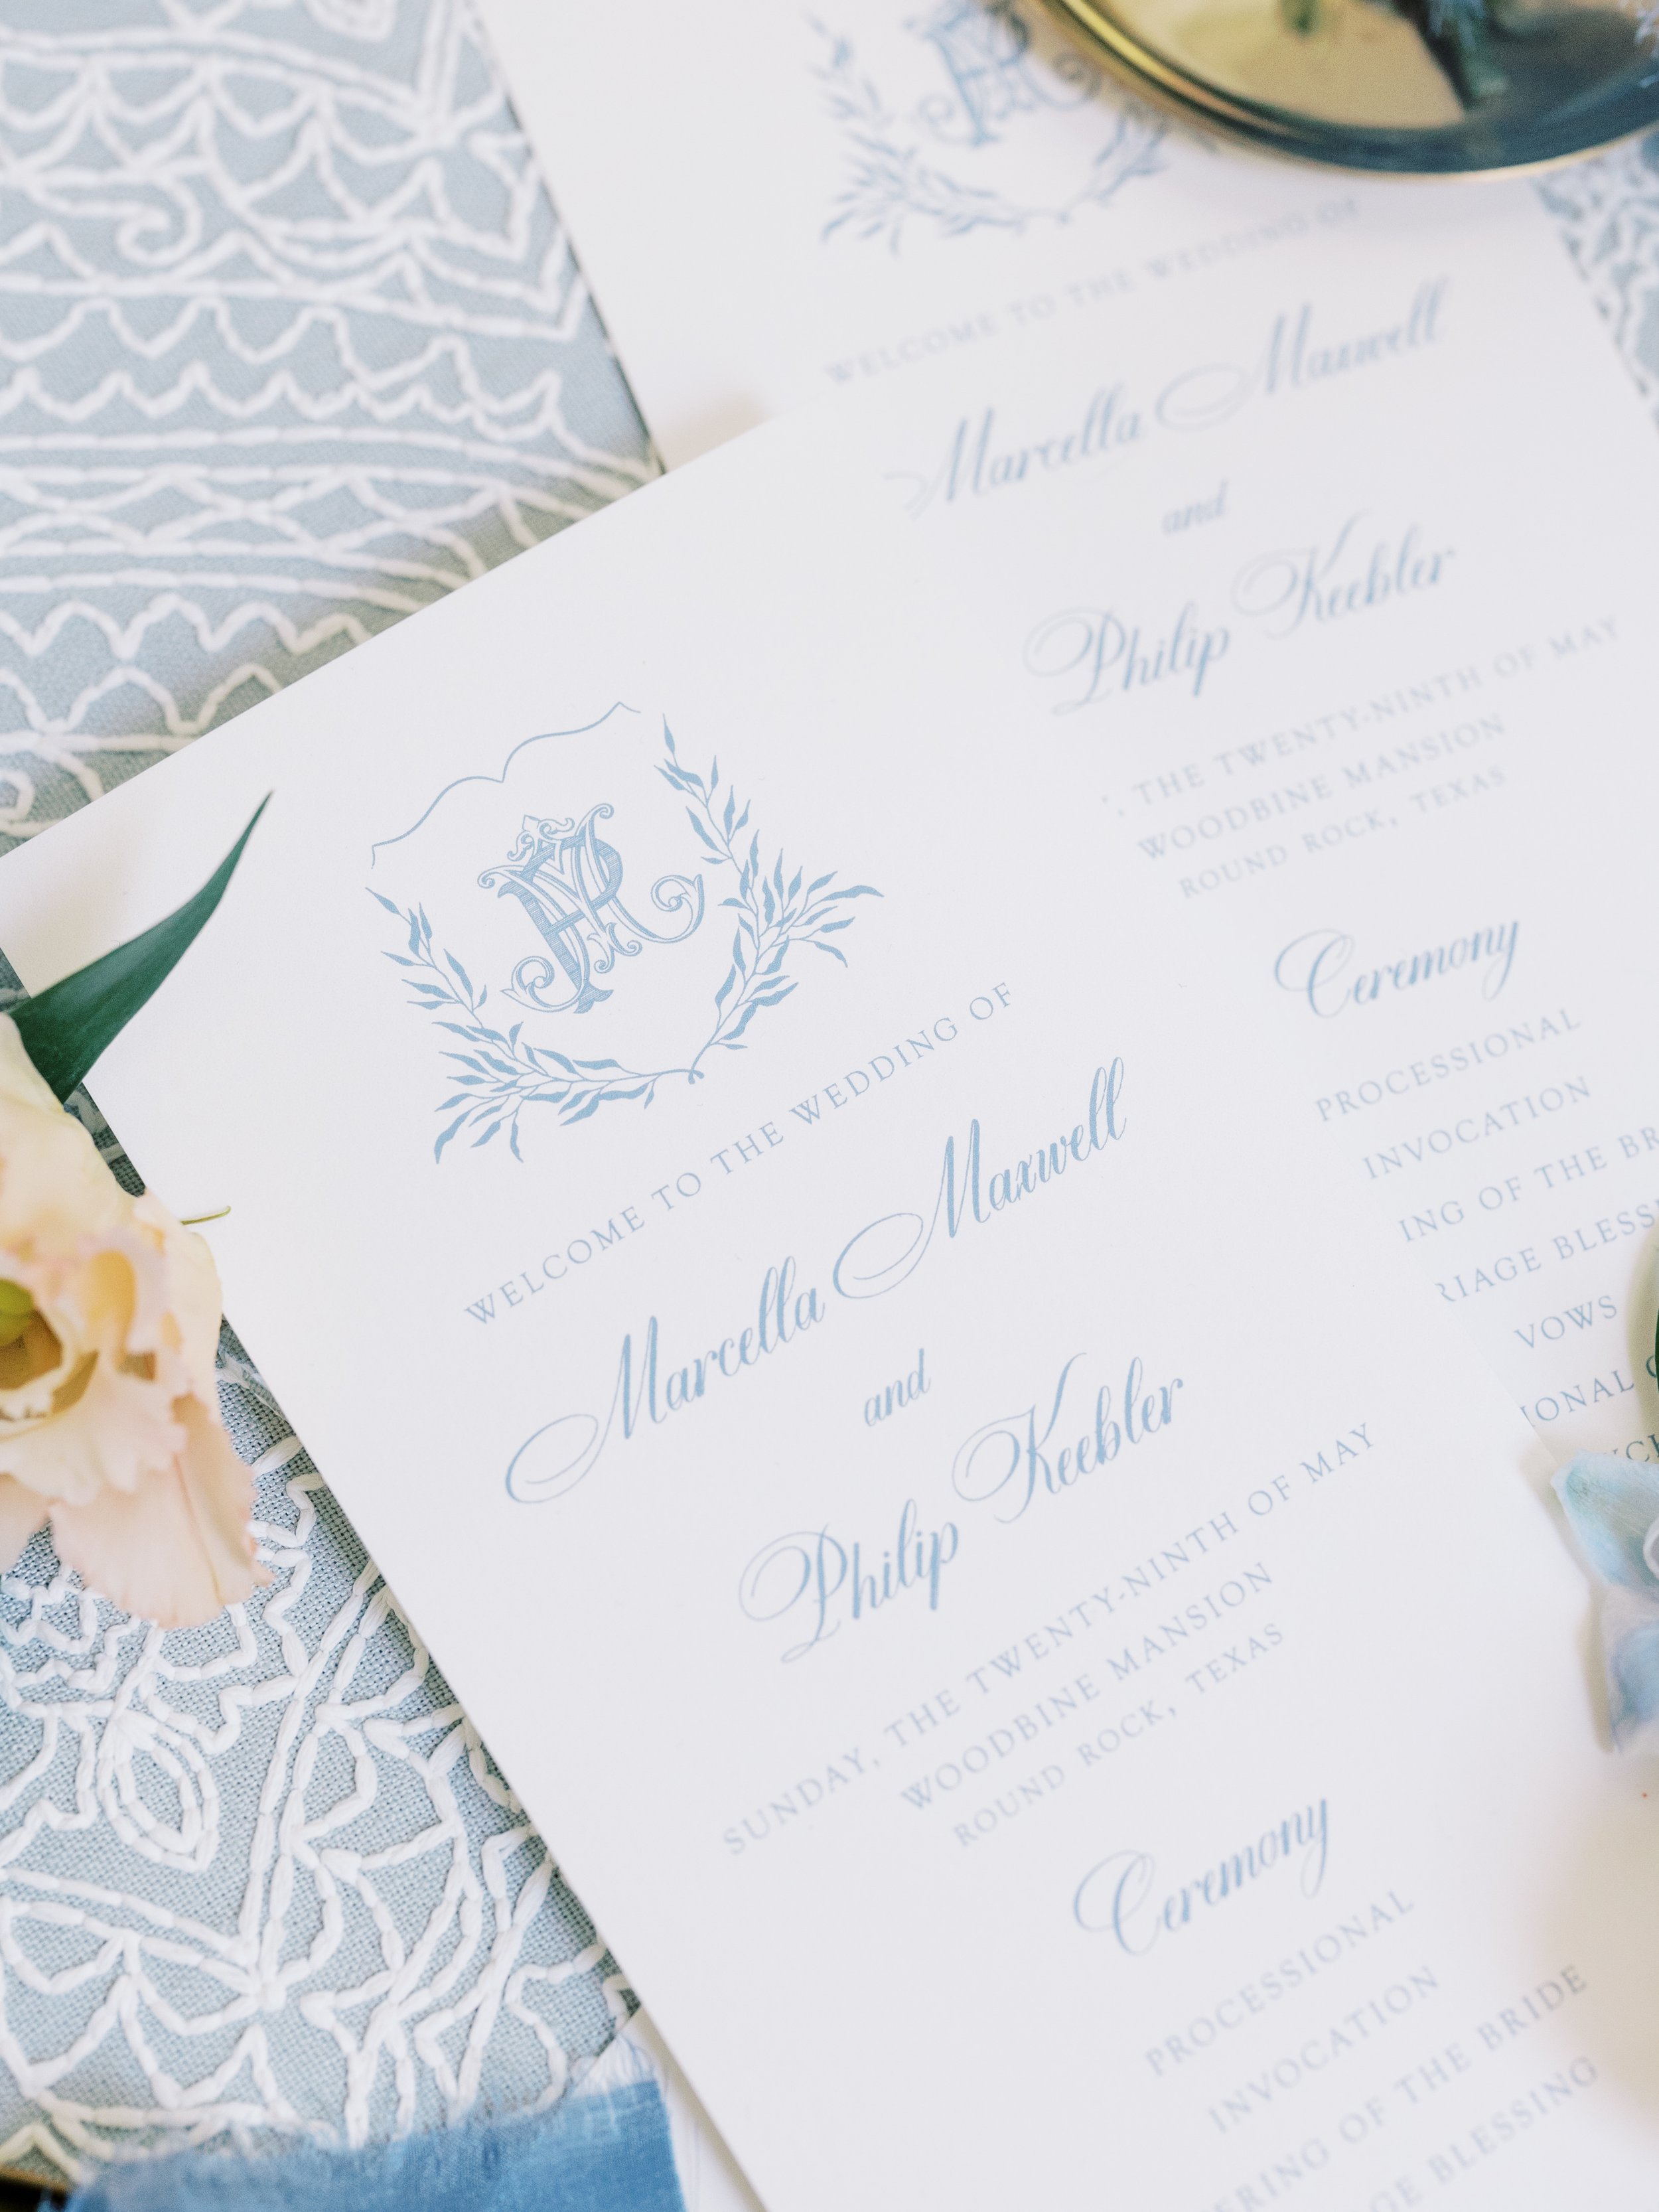 Pink-Champagne-Designs-Formal-and-sweet-blue-wedding-invitation-crest